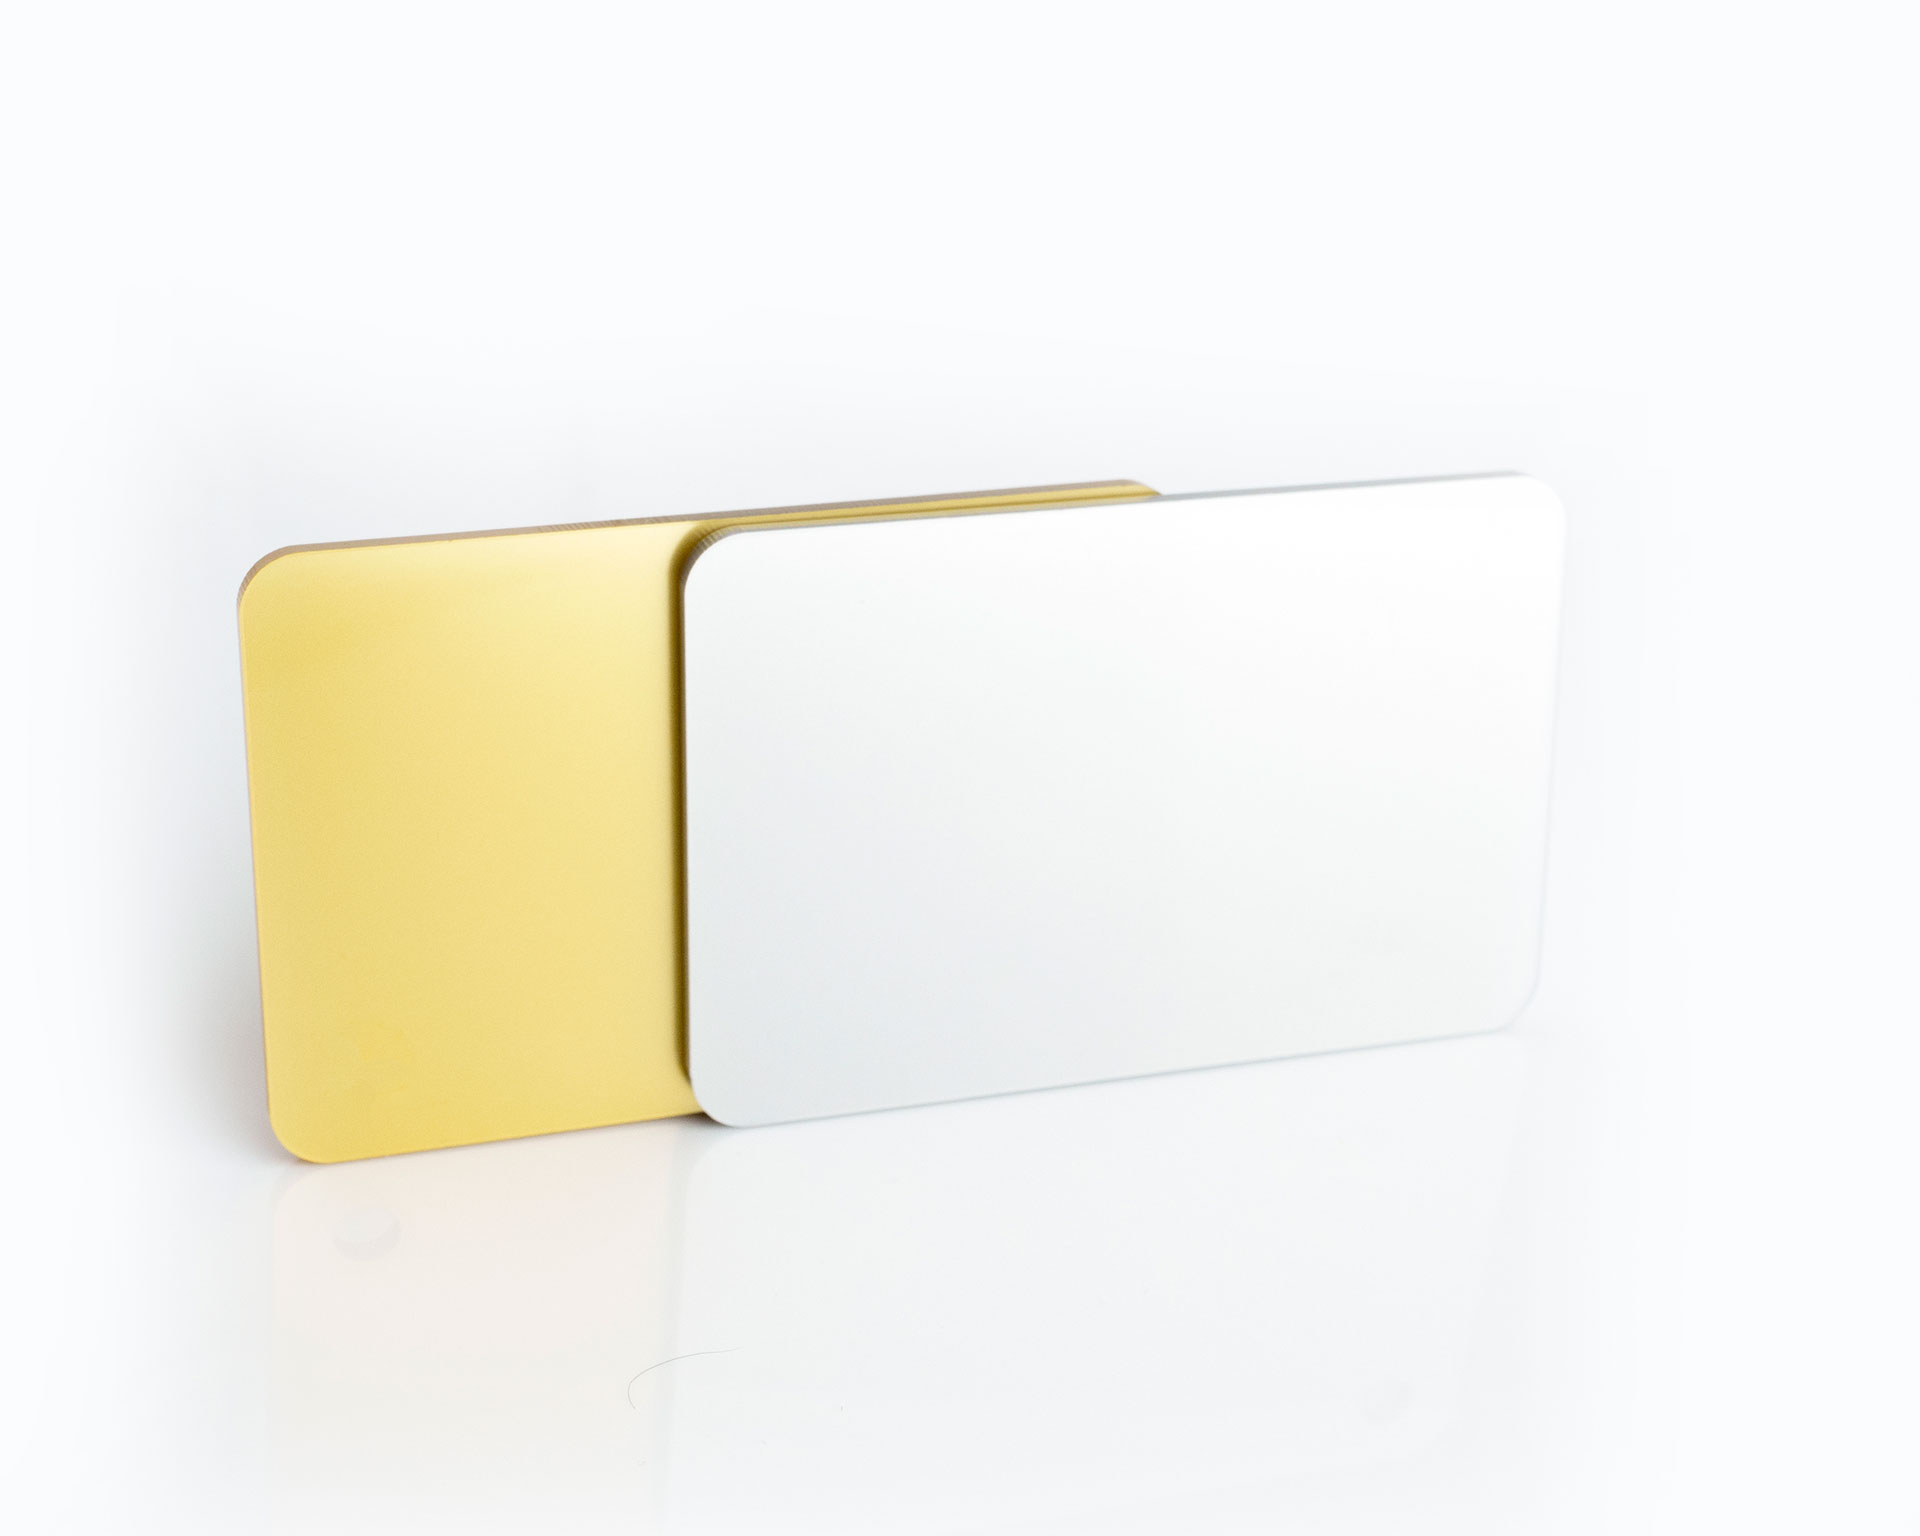 Gold and Silver Metallic Sheet Manufacture & Supplier in UAE | Sabin Plastic